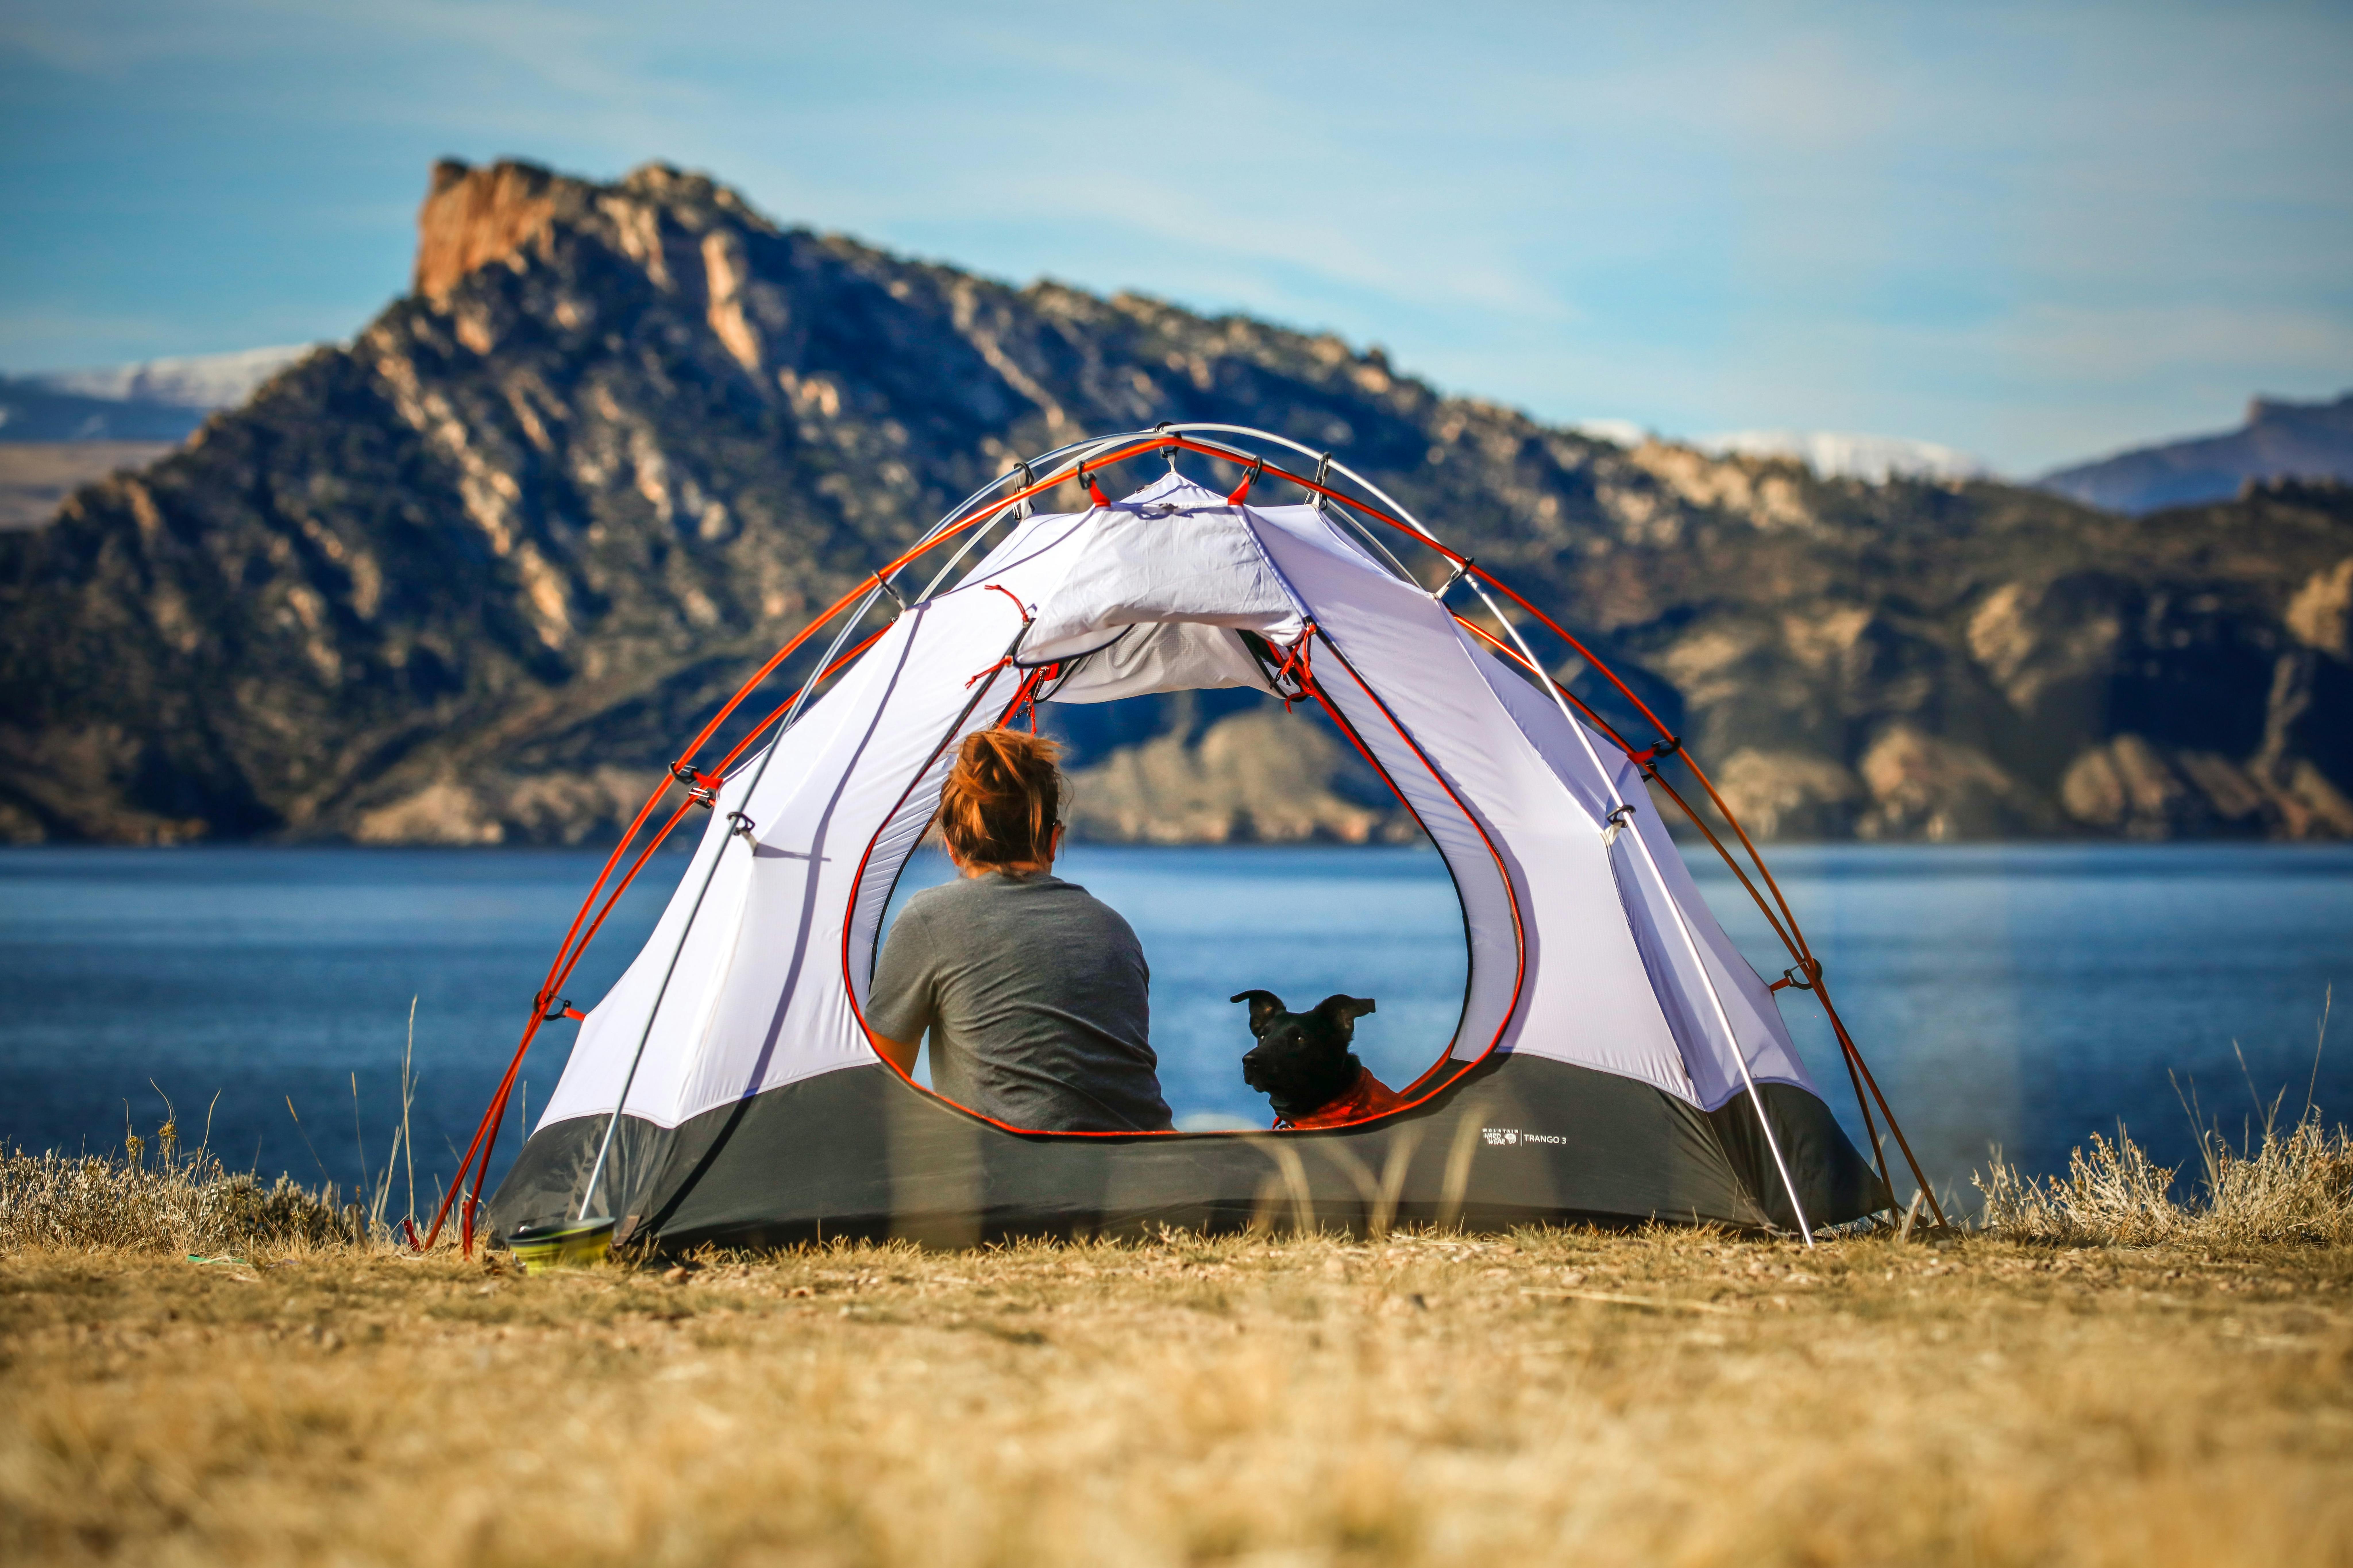 A woman and a dog sit in a white tent and look out at a lake